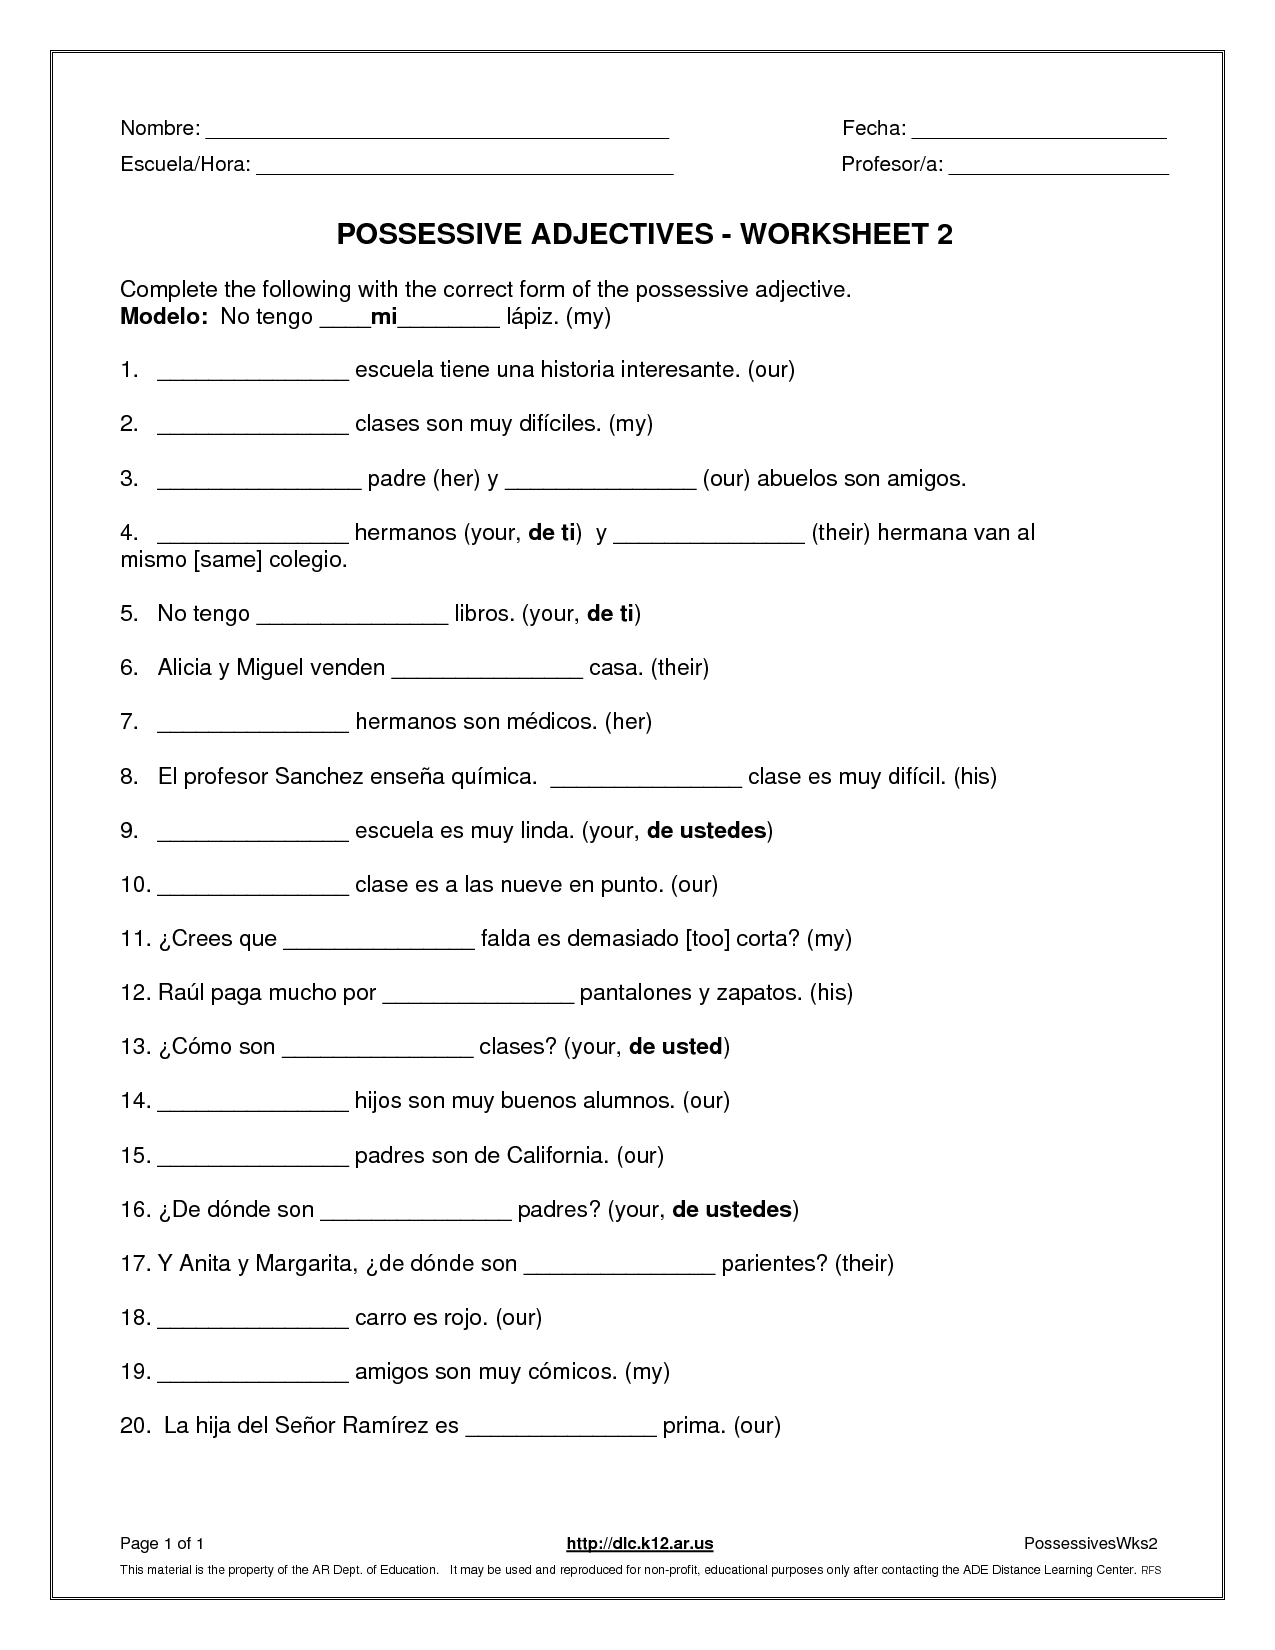 17-best-images-of-spanish-demonstrative-adjectives-worksheet-spanish-demonstrative-adjective